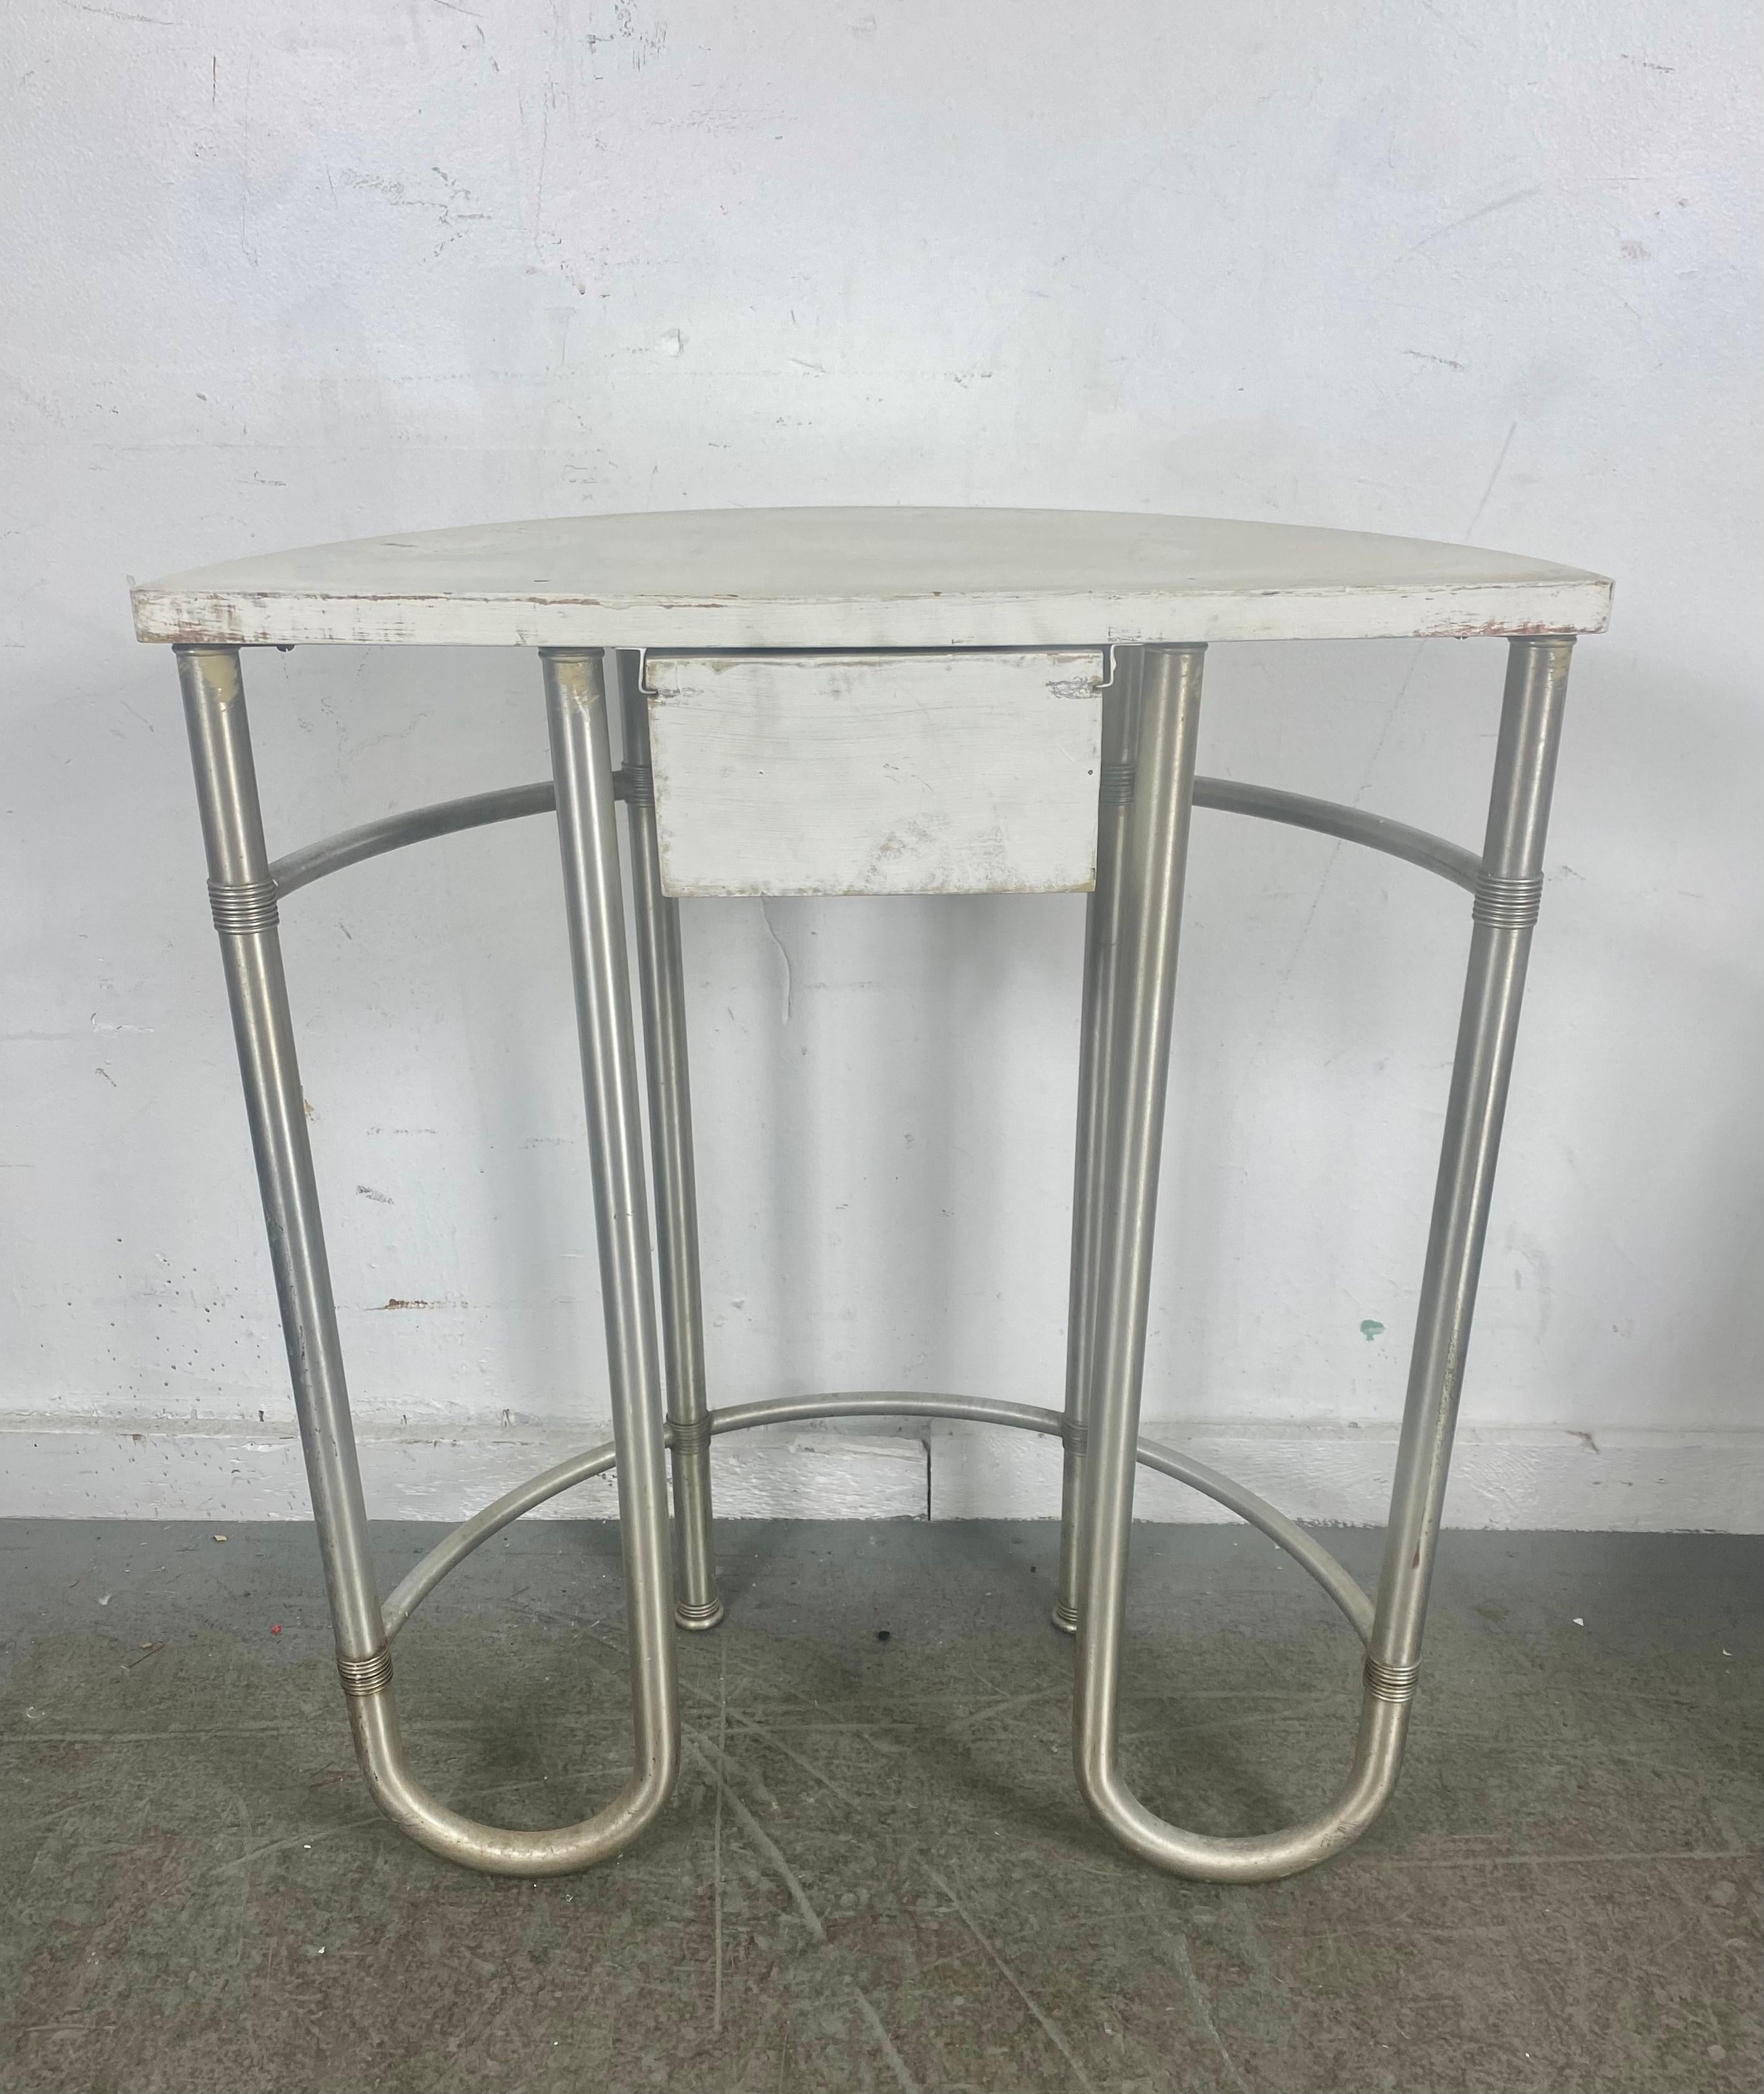 Rare Warren McArthur Console / Hall Table, Art Deco, Machine Age, 1930's In Good Condition For Sale In Buffalo, NY